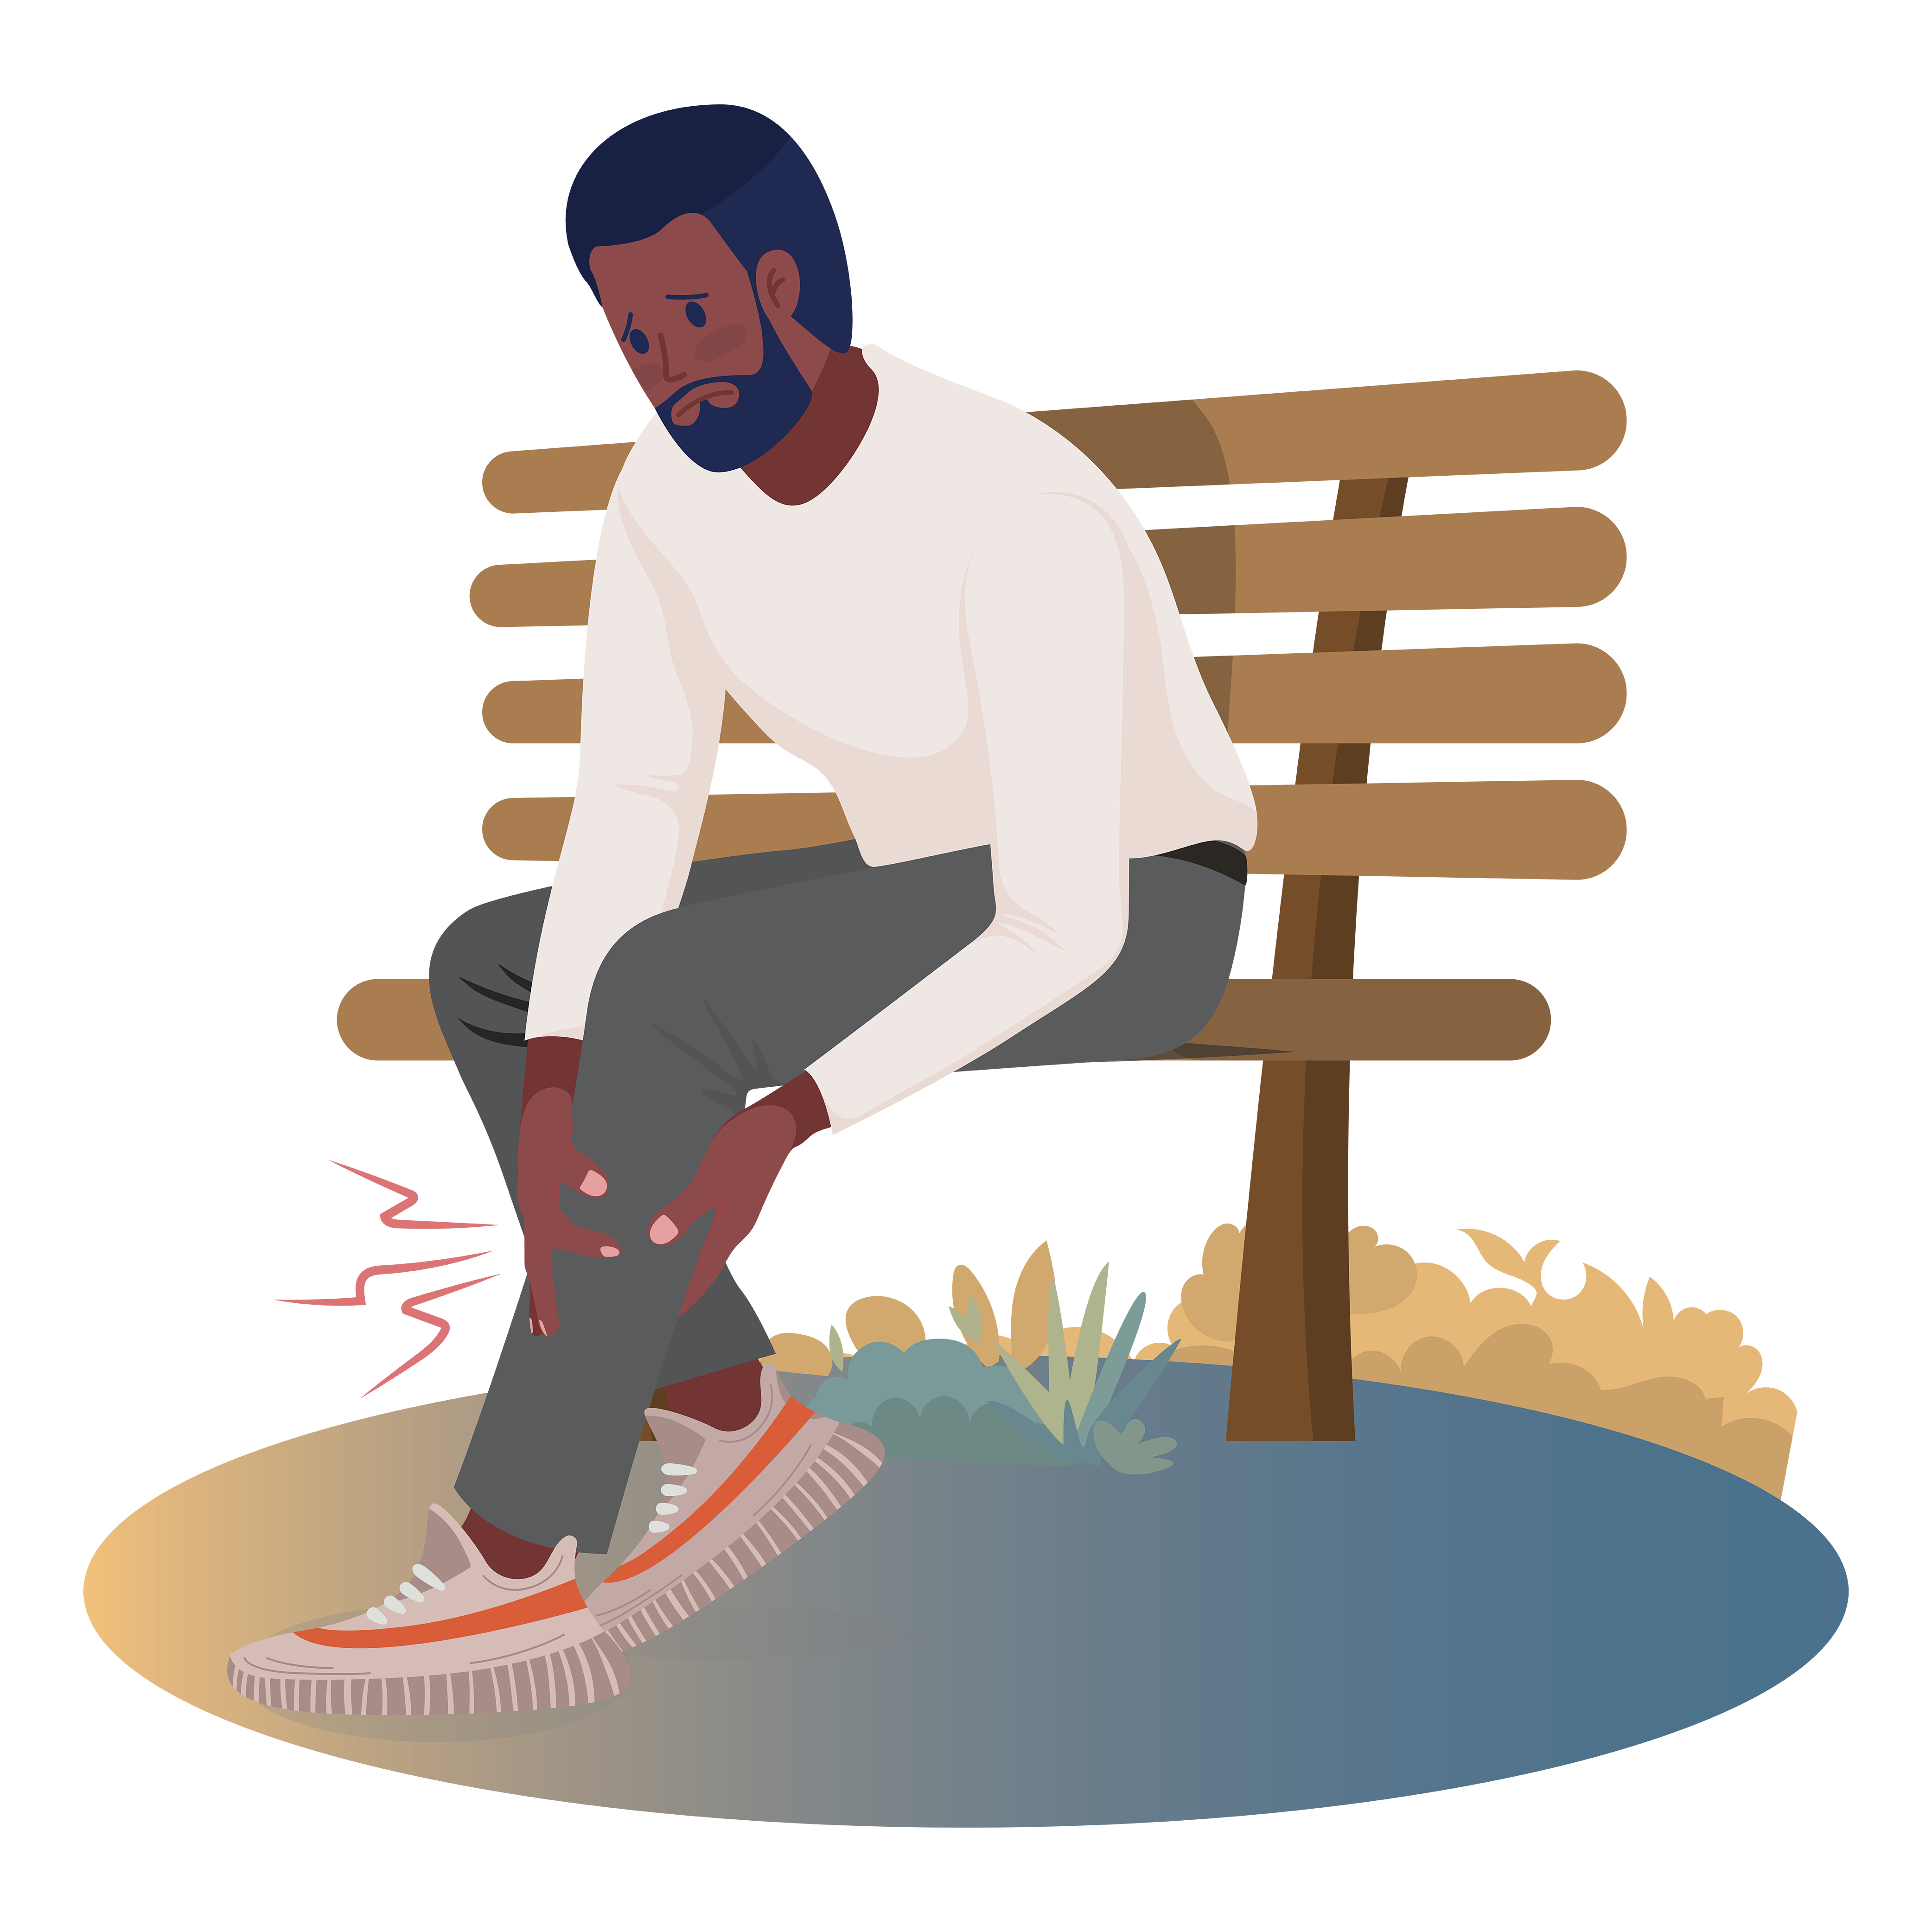 Man with leg pain sits on a bench.